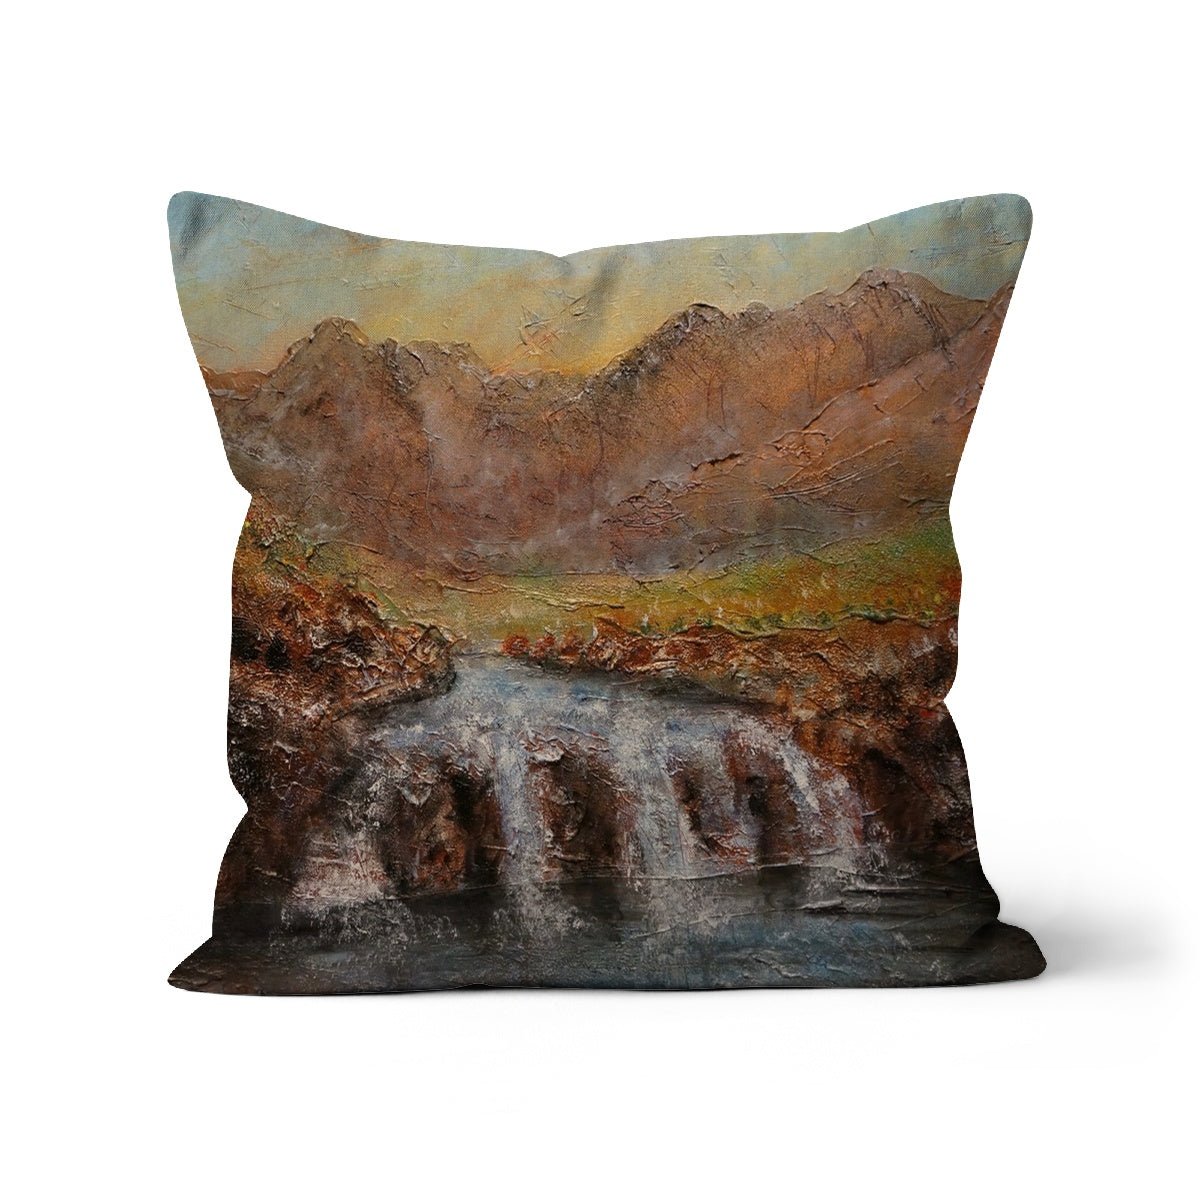 Fairy Pools Dawn Skye Art Gifts Cushion-Cushions-Skye Art Gallery-Linen-18"x18"-Paintings, Prints, Homeware, Art Gifts From Scotland By Scottish Artist Kevin Hunter